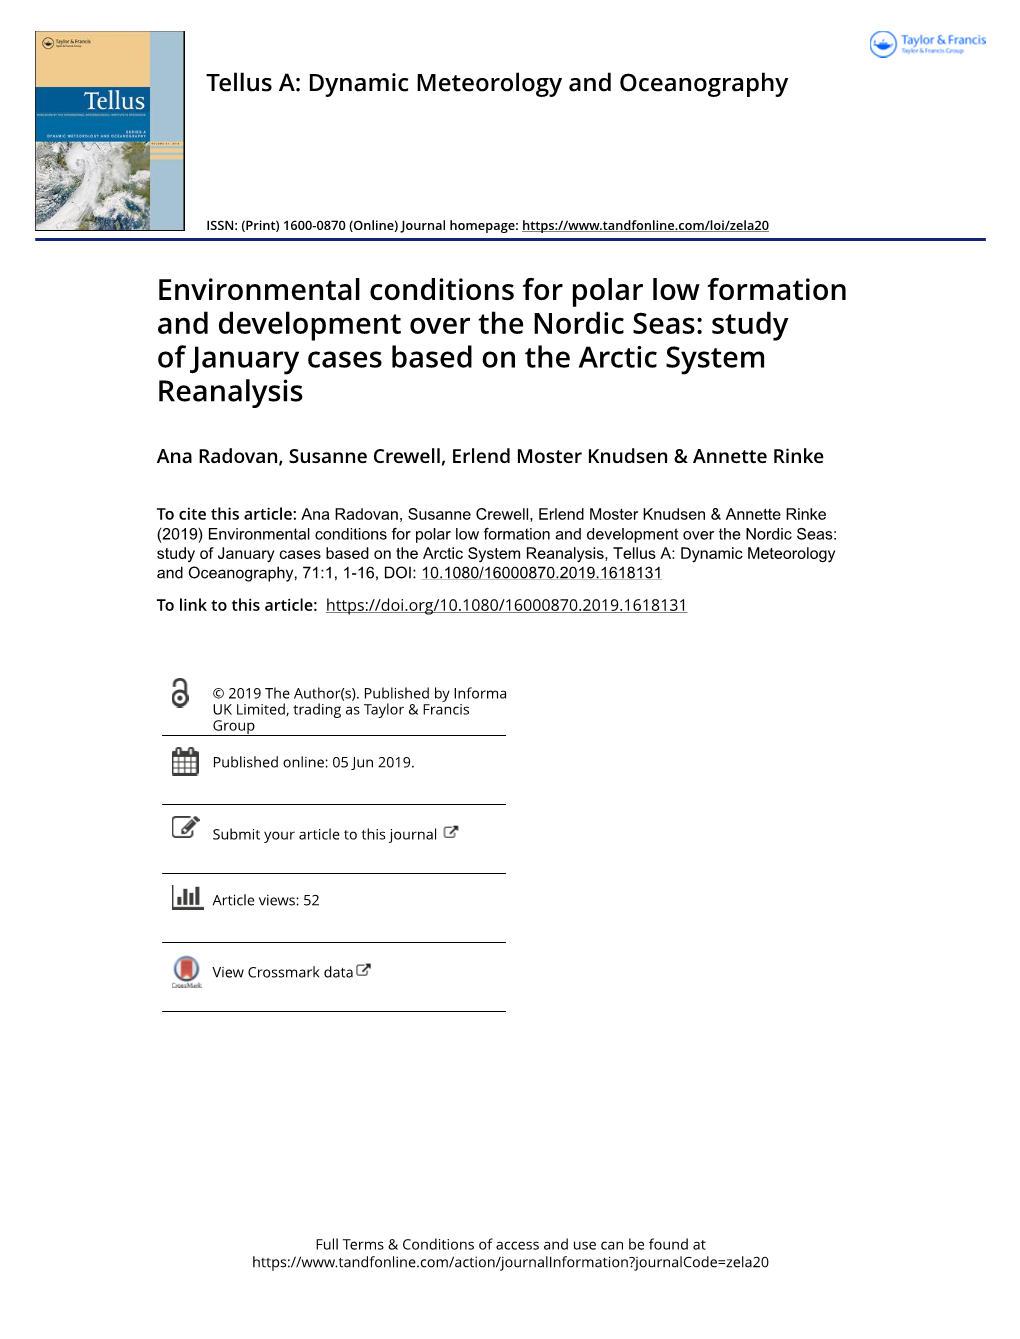 Environmental Conditions for Polar Low Formation and Development Over the Nordic Seas: Study of January Cases Based on the Arctic System Reanalysis